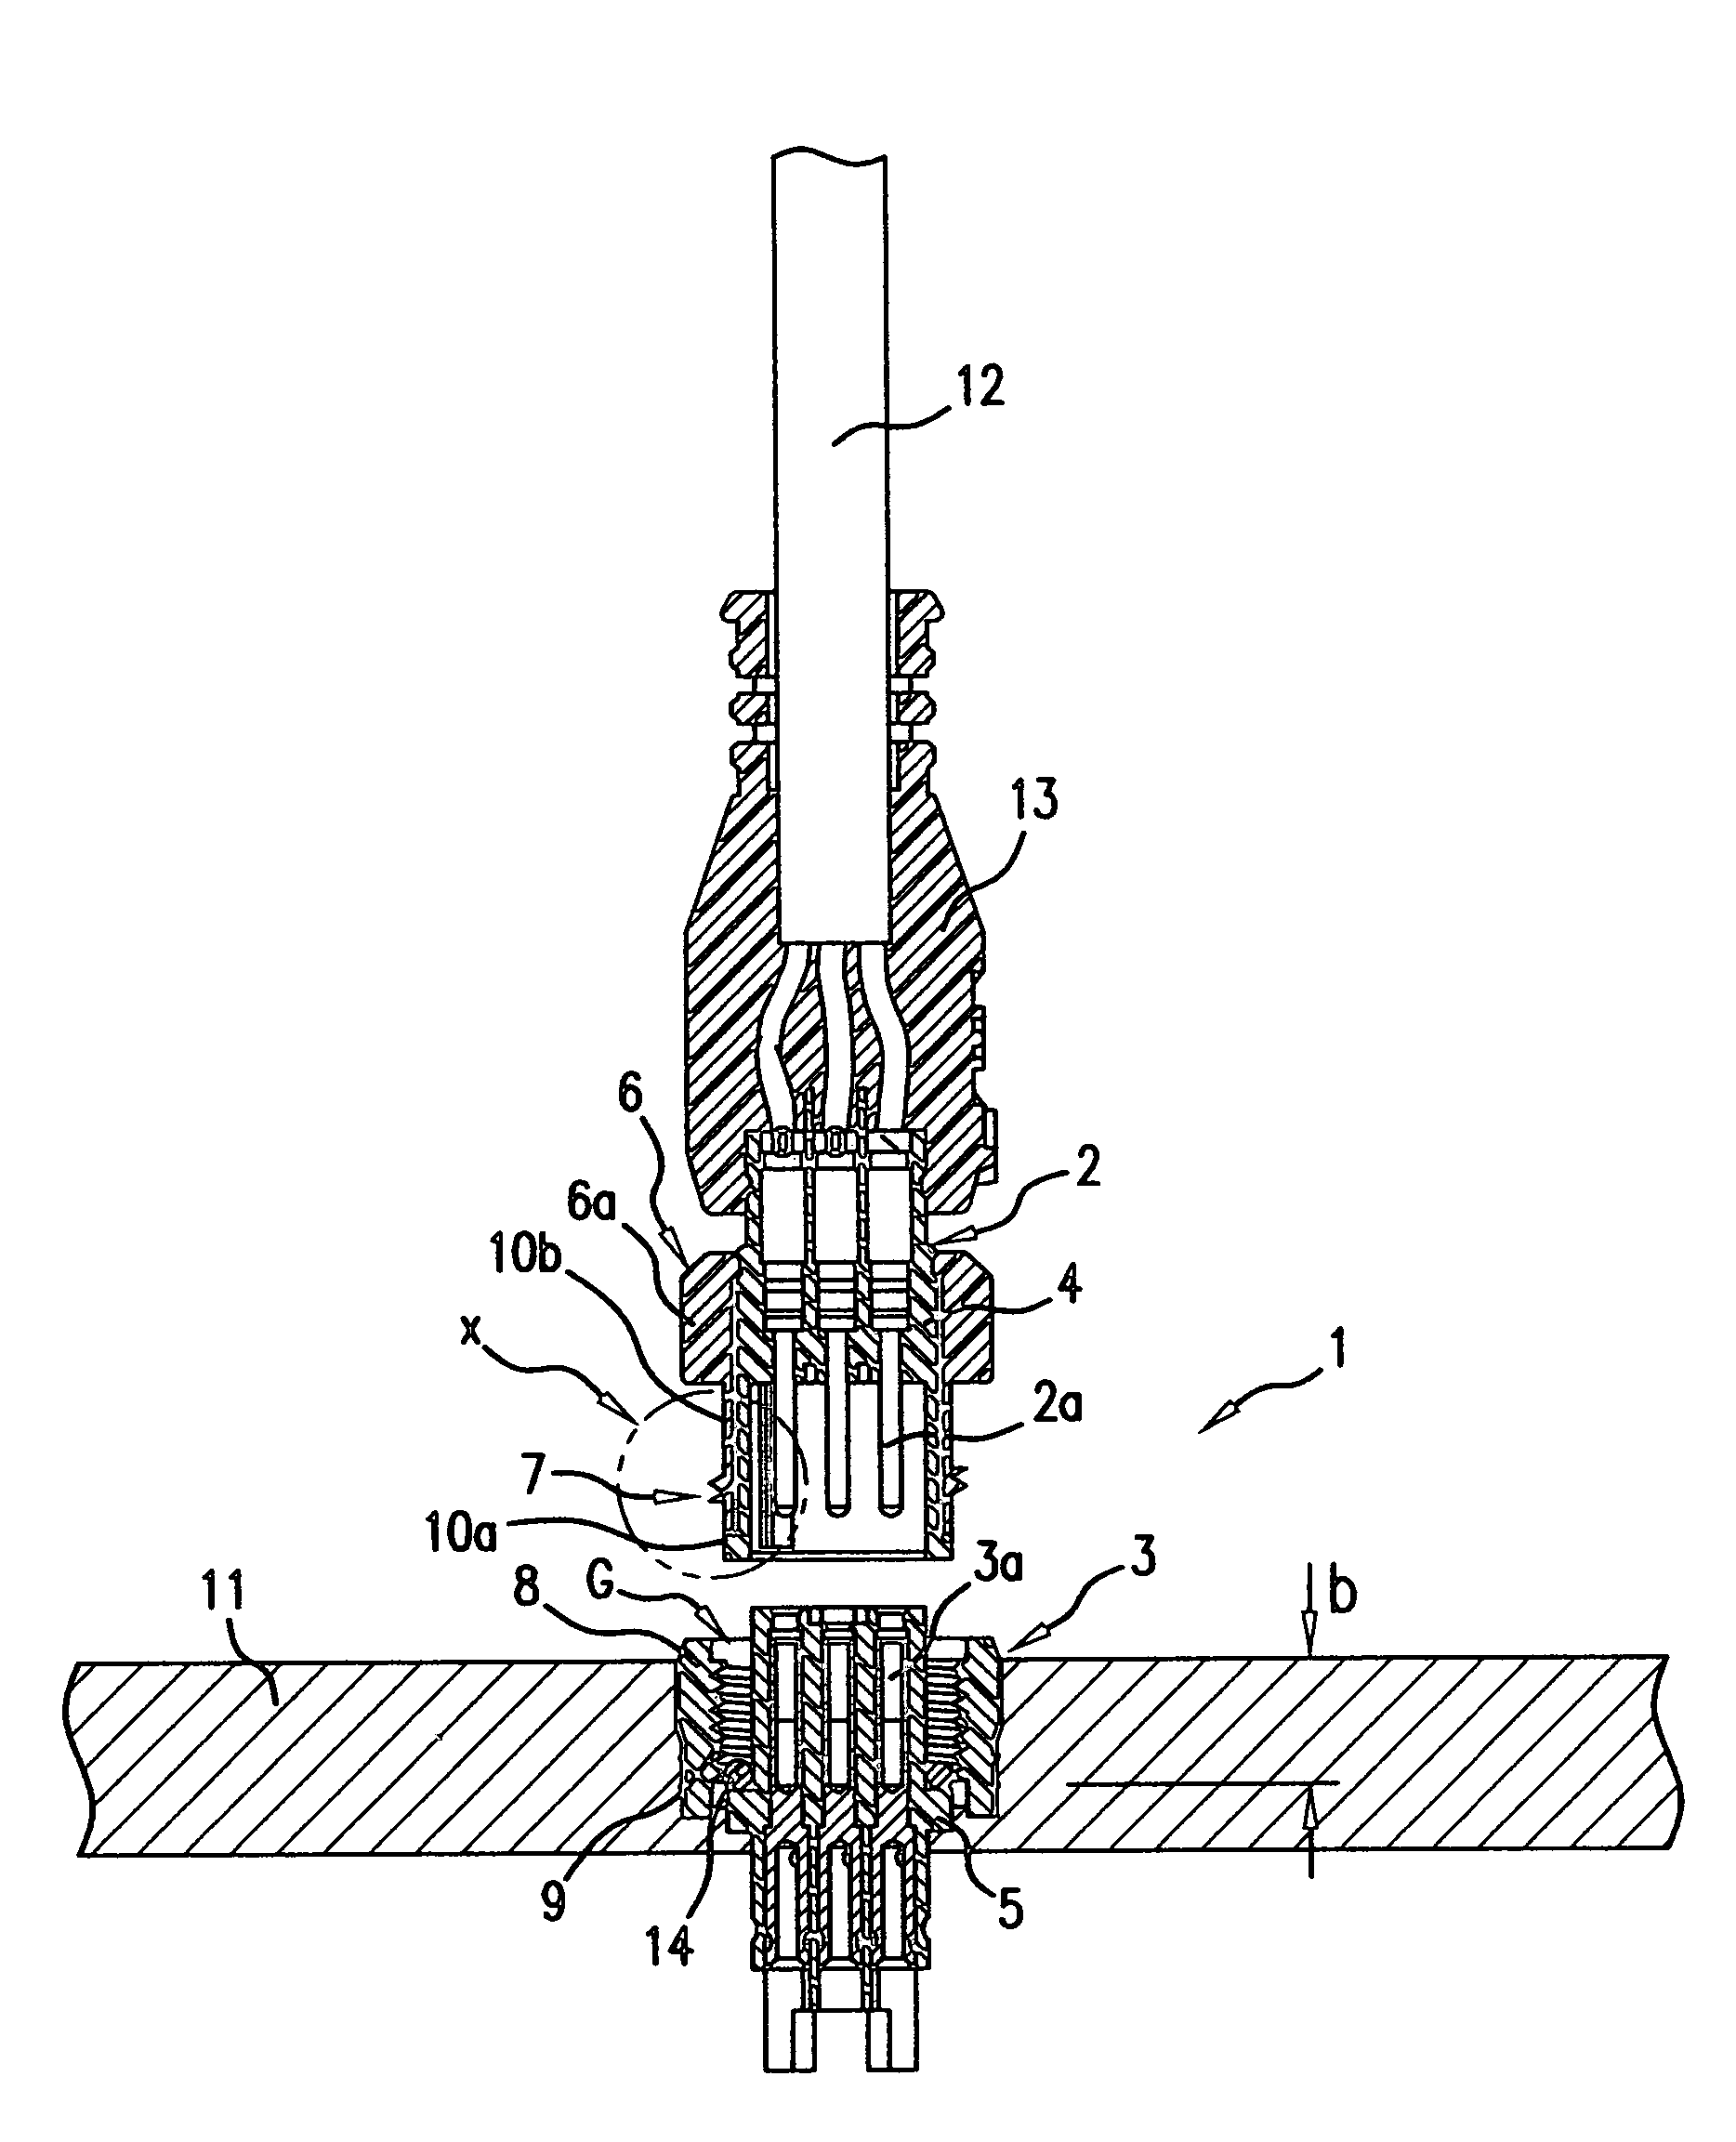 Electrical connector having plug and socket components